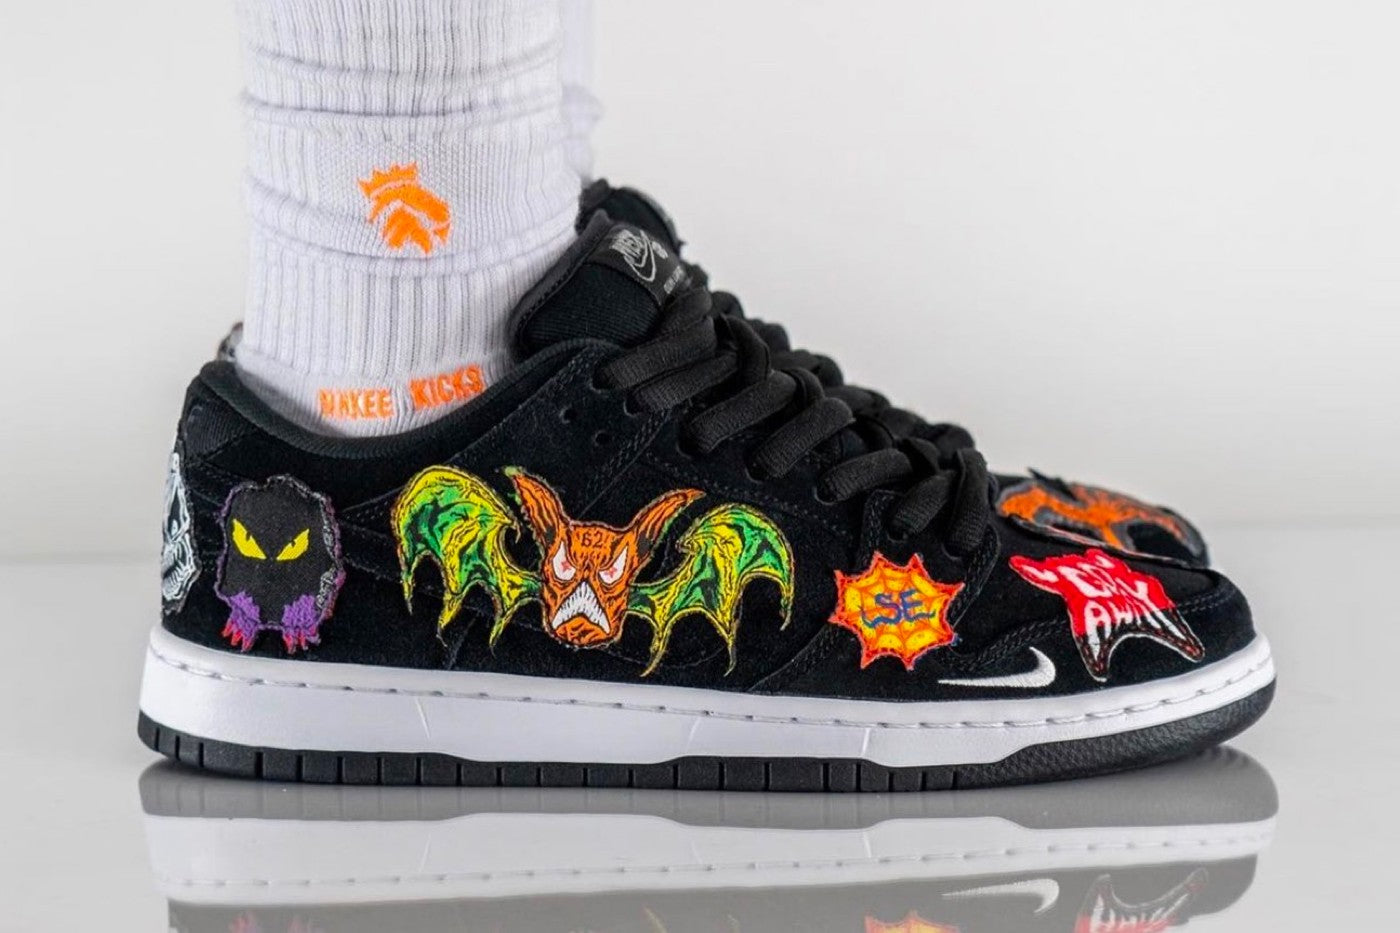 The Neckface x Nike SB Dunk Low is Dropping Just in Time for Halloween